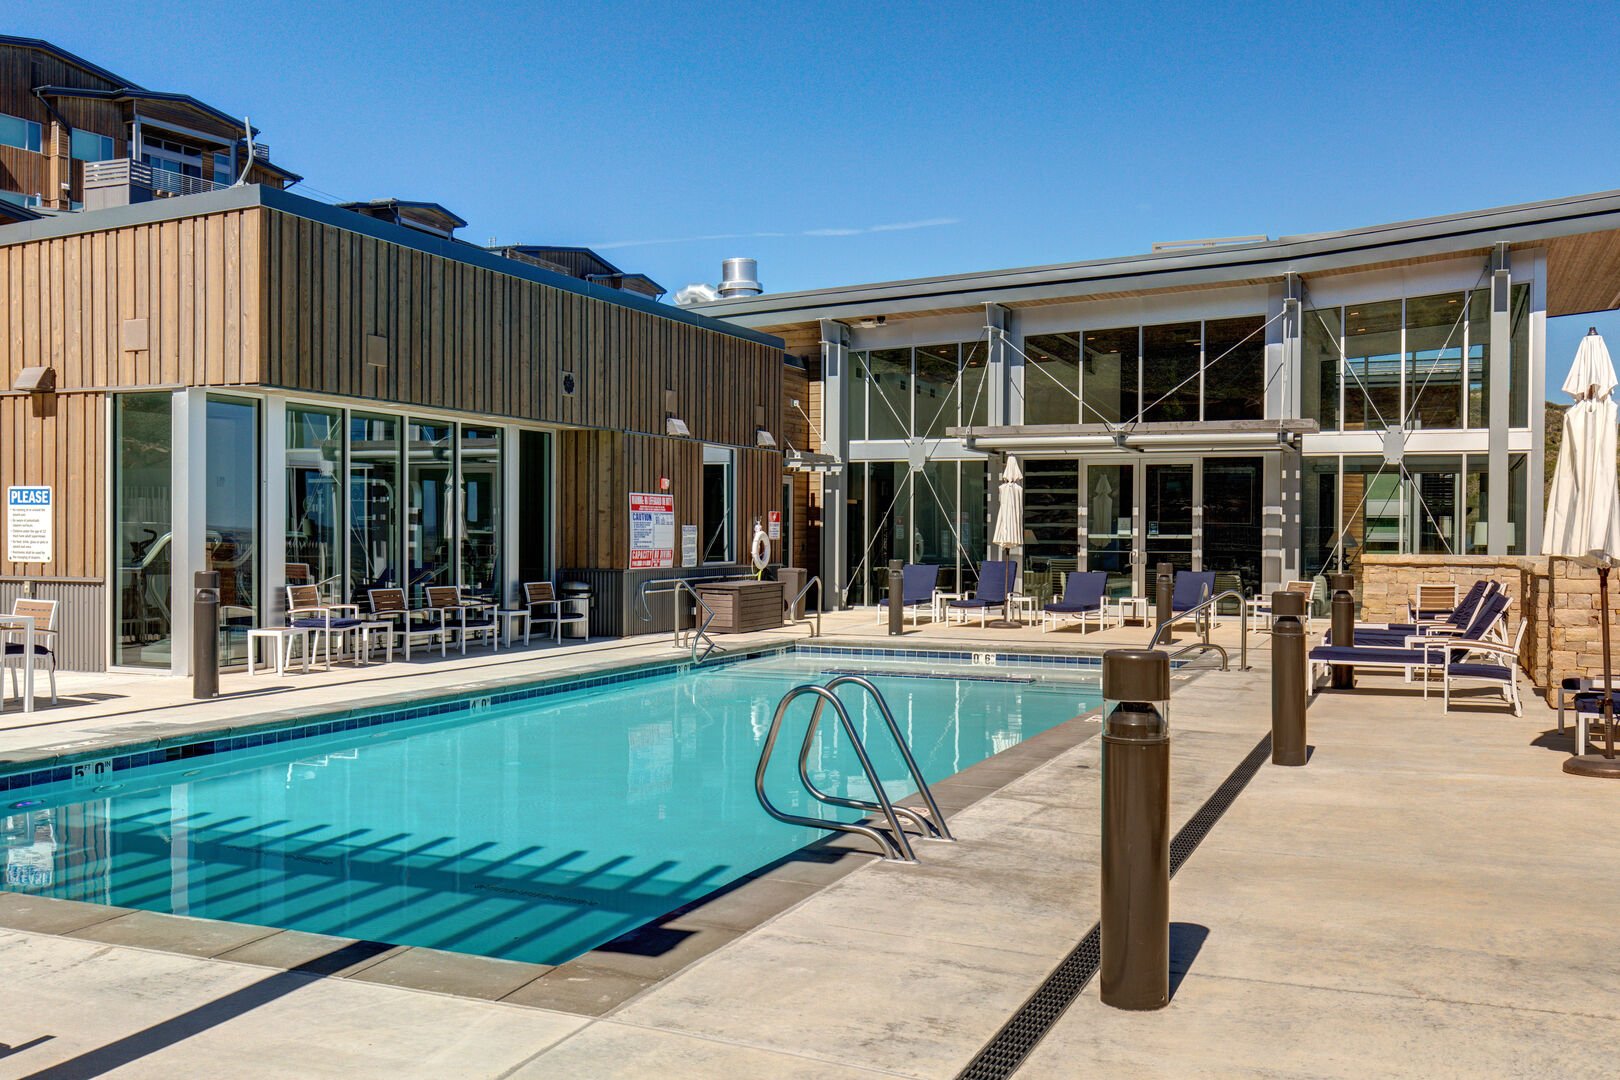 Clubhouse, Pool & Fitness Room just some of the amenities available to guests!